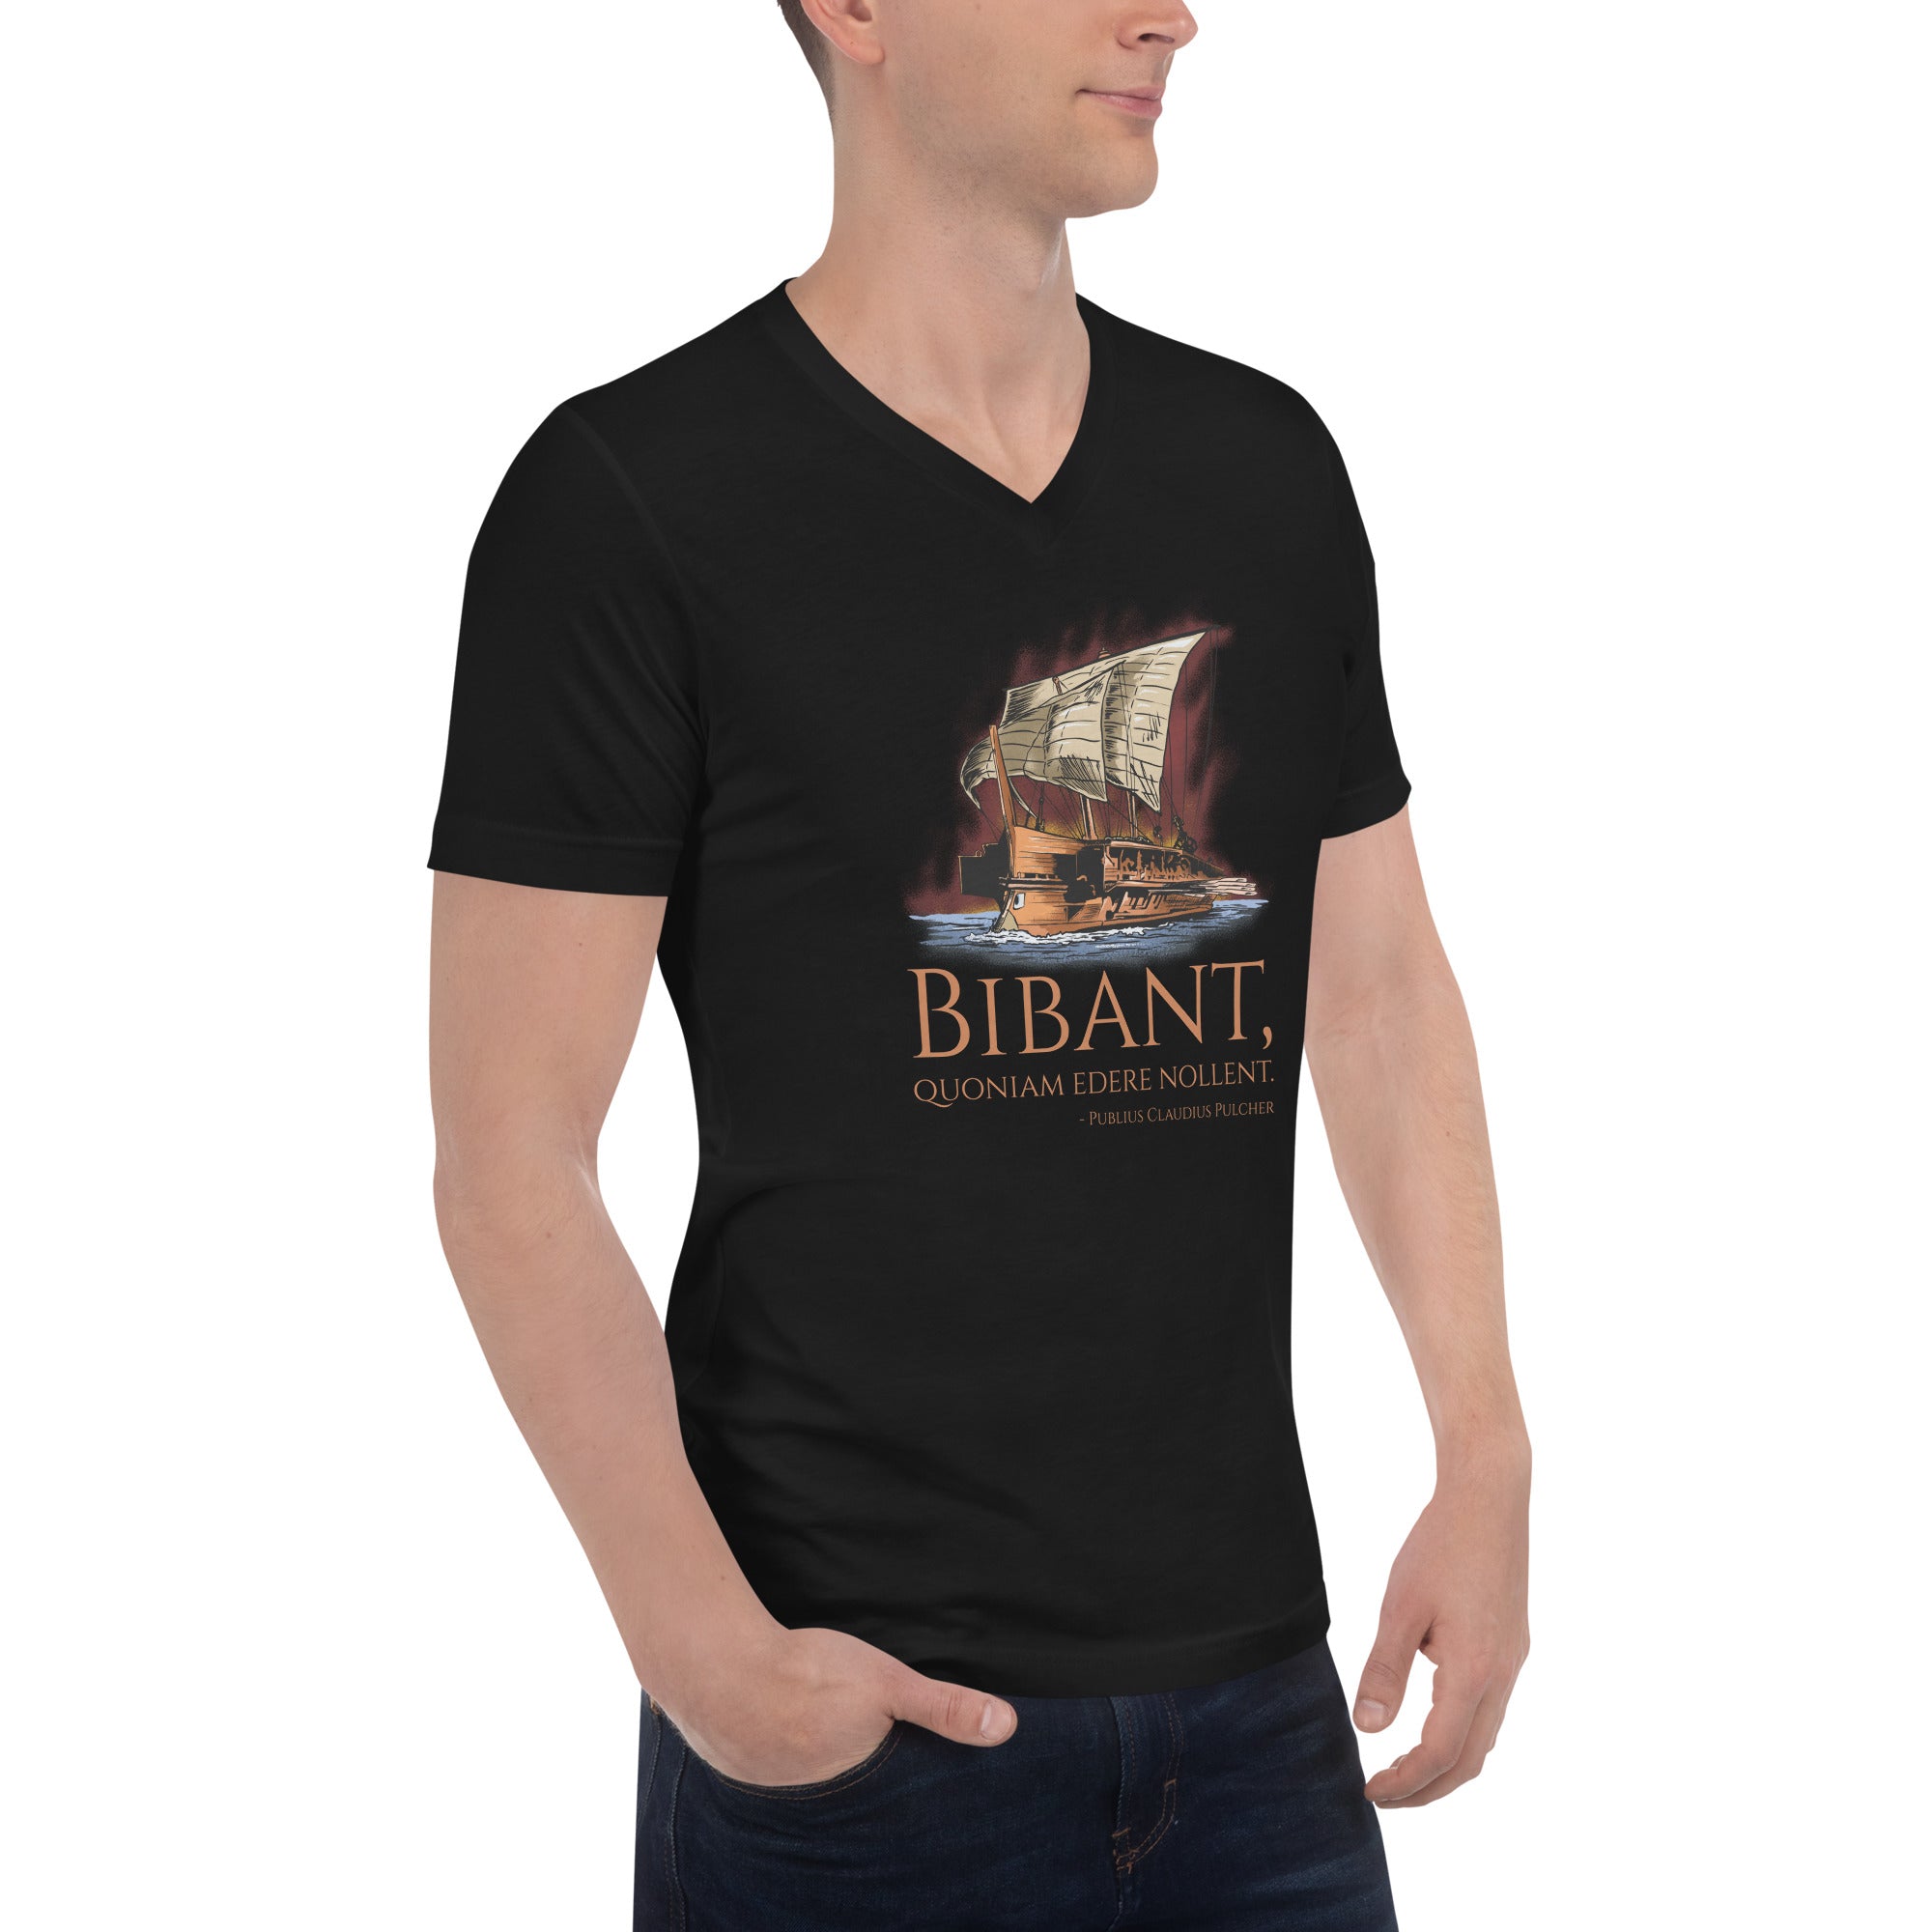 Ancient Rome - The Sacred Chickens - First Punic War - Classical Latin - Unisex Short Sleeve V-Neck T-Shirt